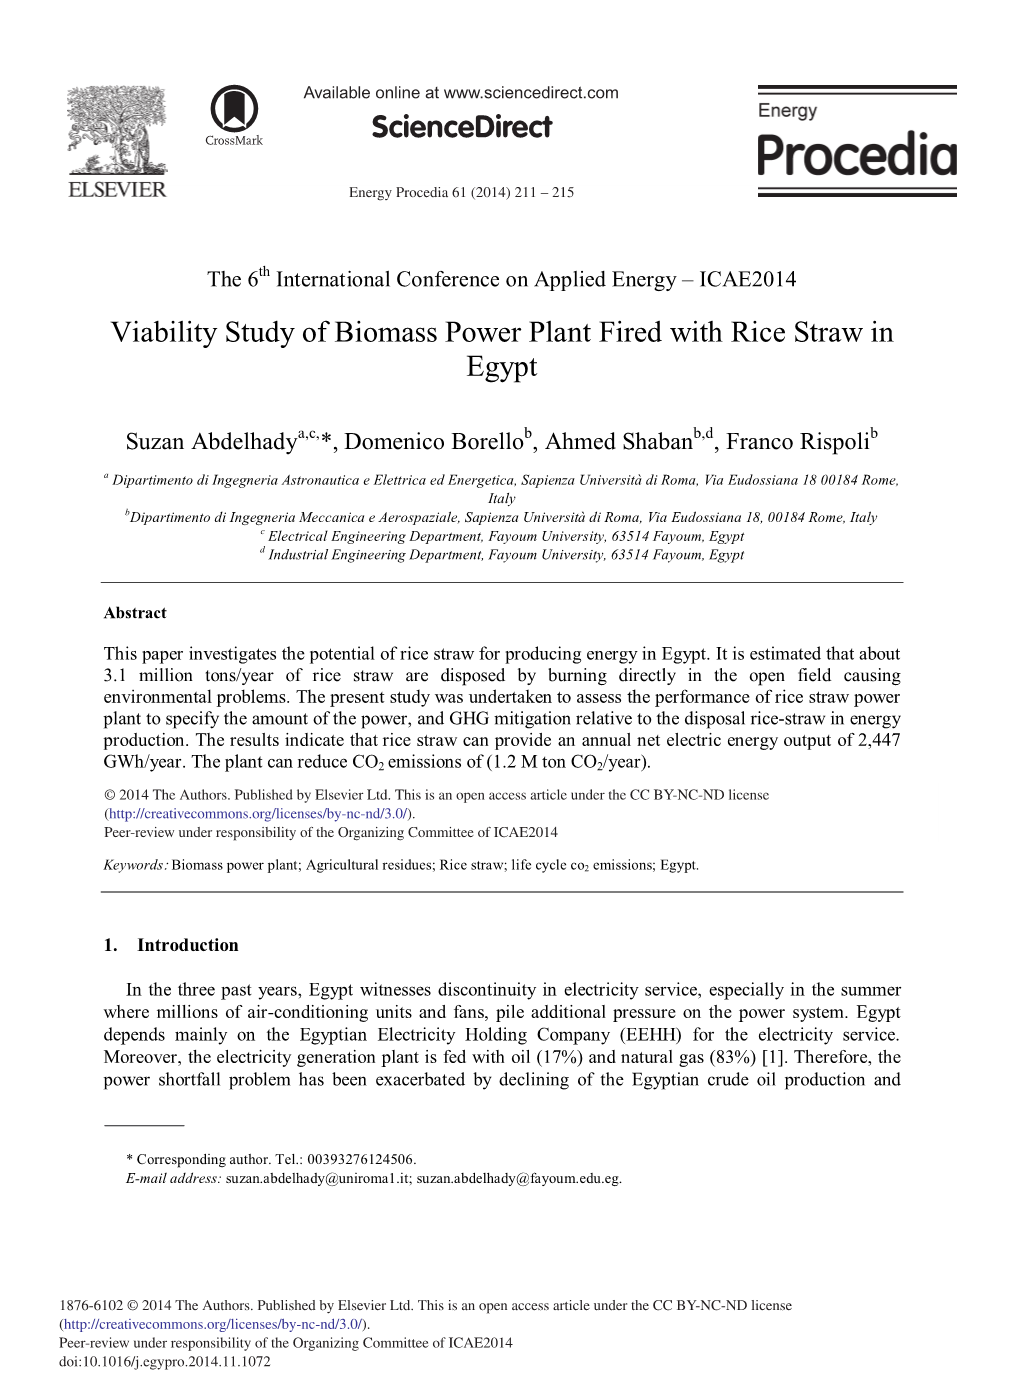 Viability Study of Biomass Power Plant Fired with Rice Straw in Egypt